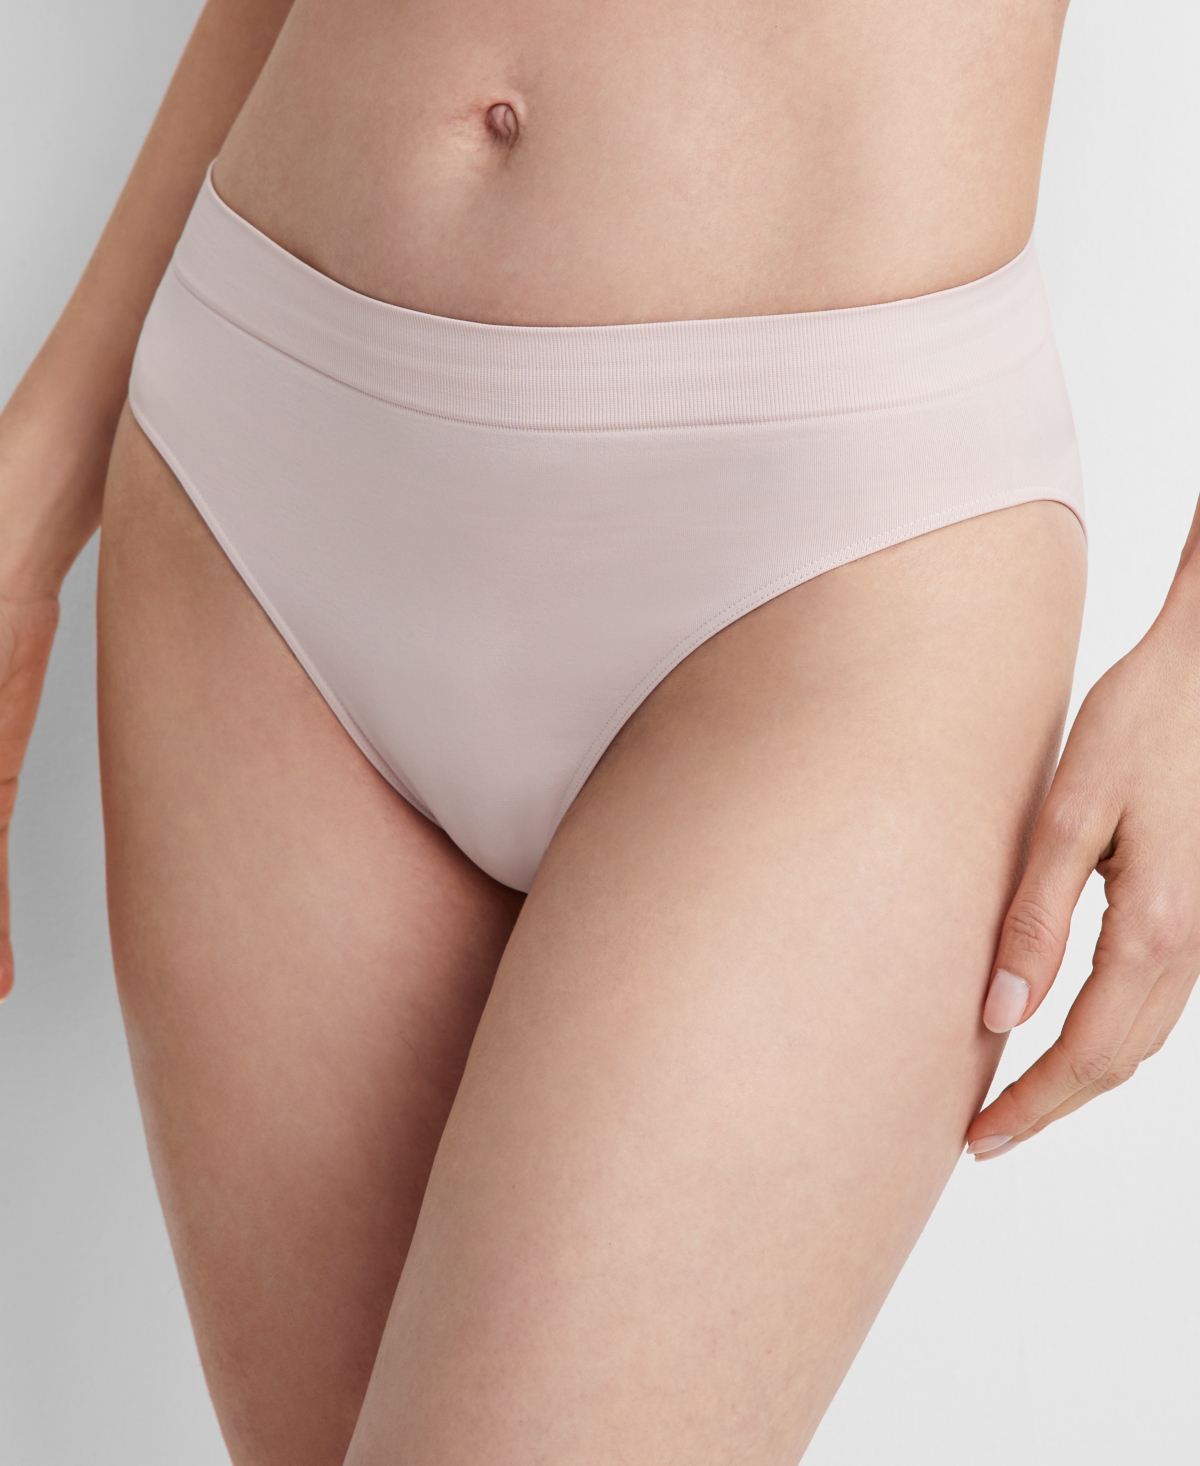 State Of Day Women's Seamless High-cut Underwear, Created For Macy's In Sepia Rose